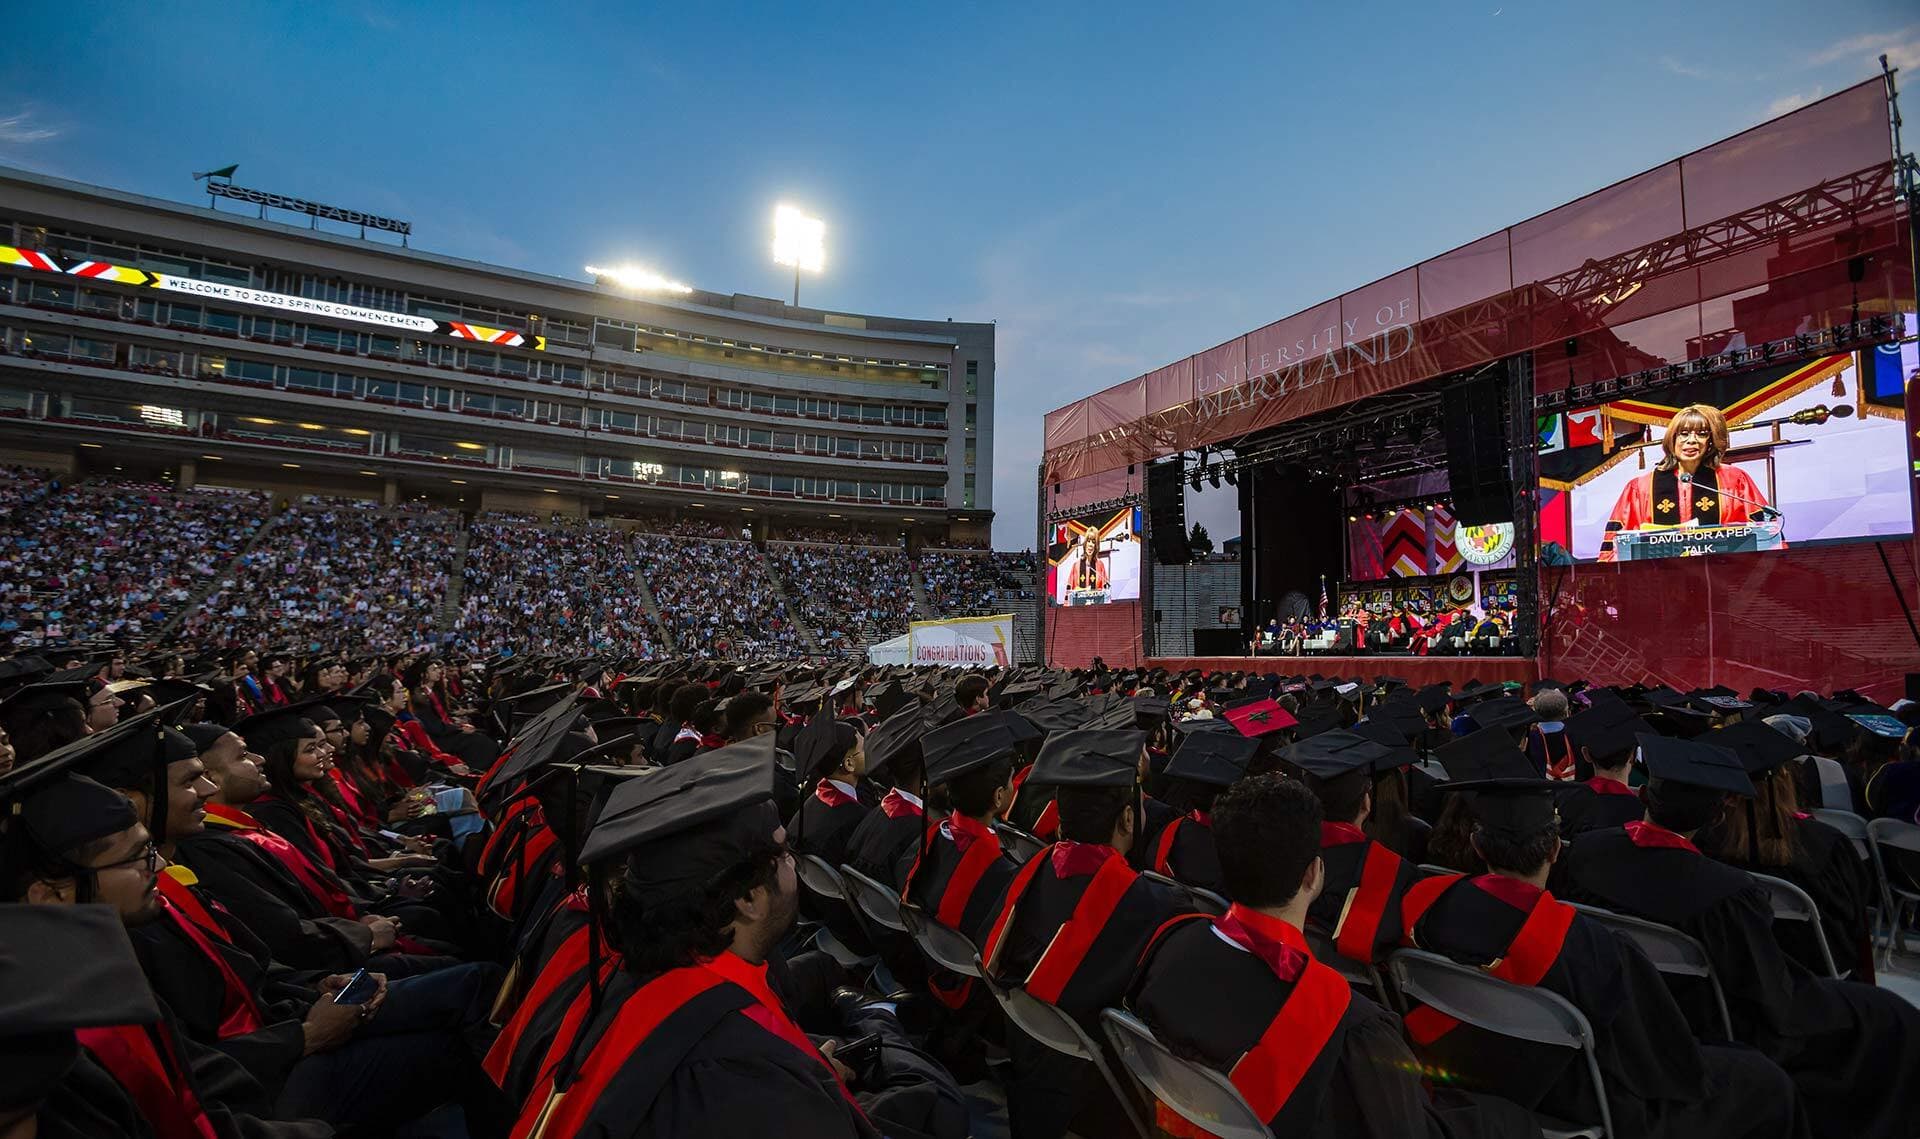 Students in caps and gowns sit in a stadium listening to a Gayle King speak on stage